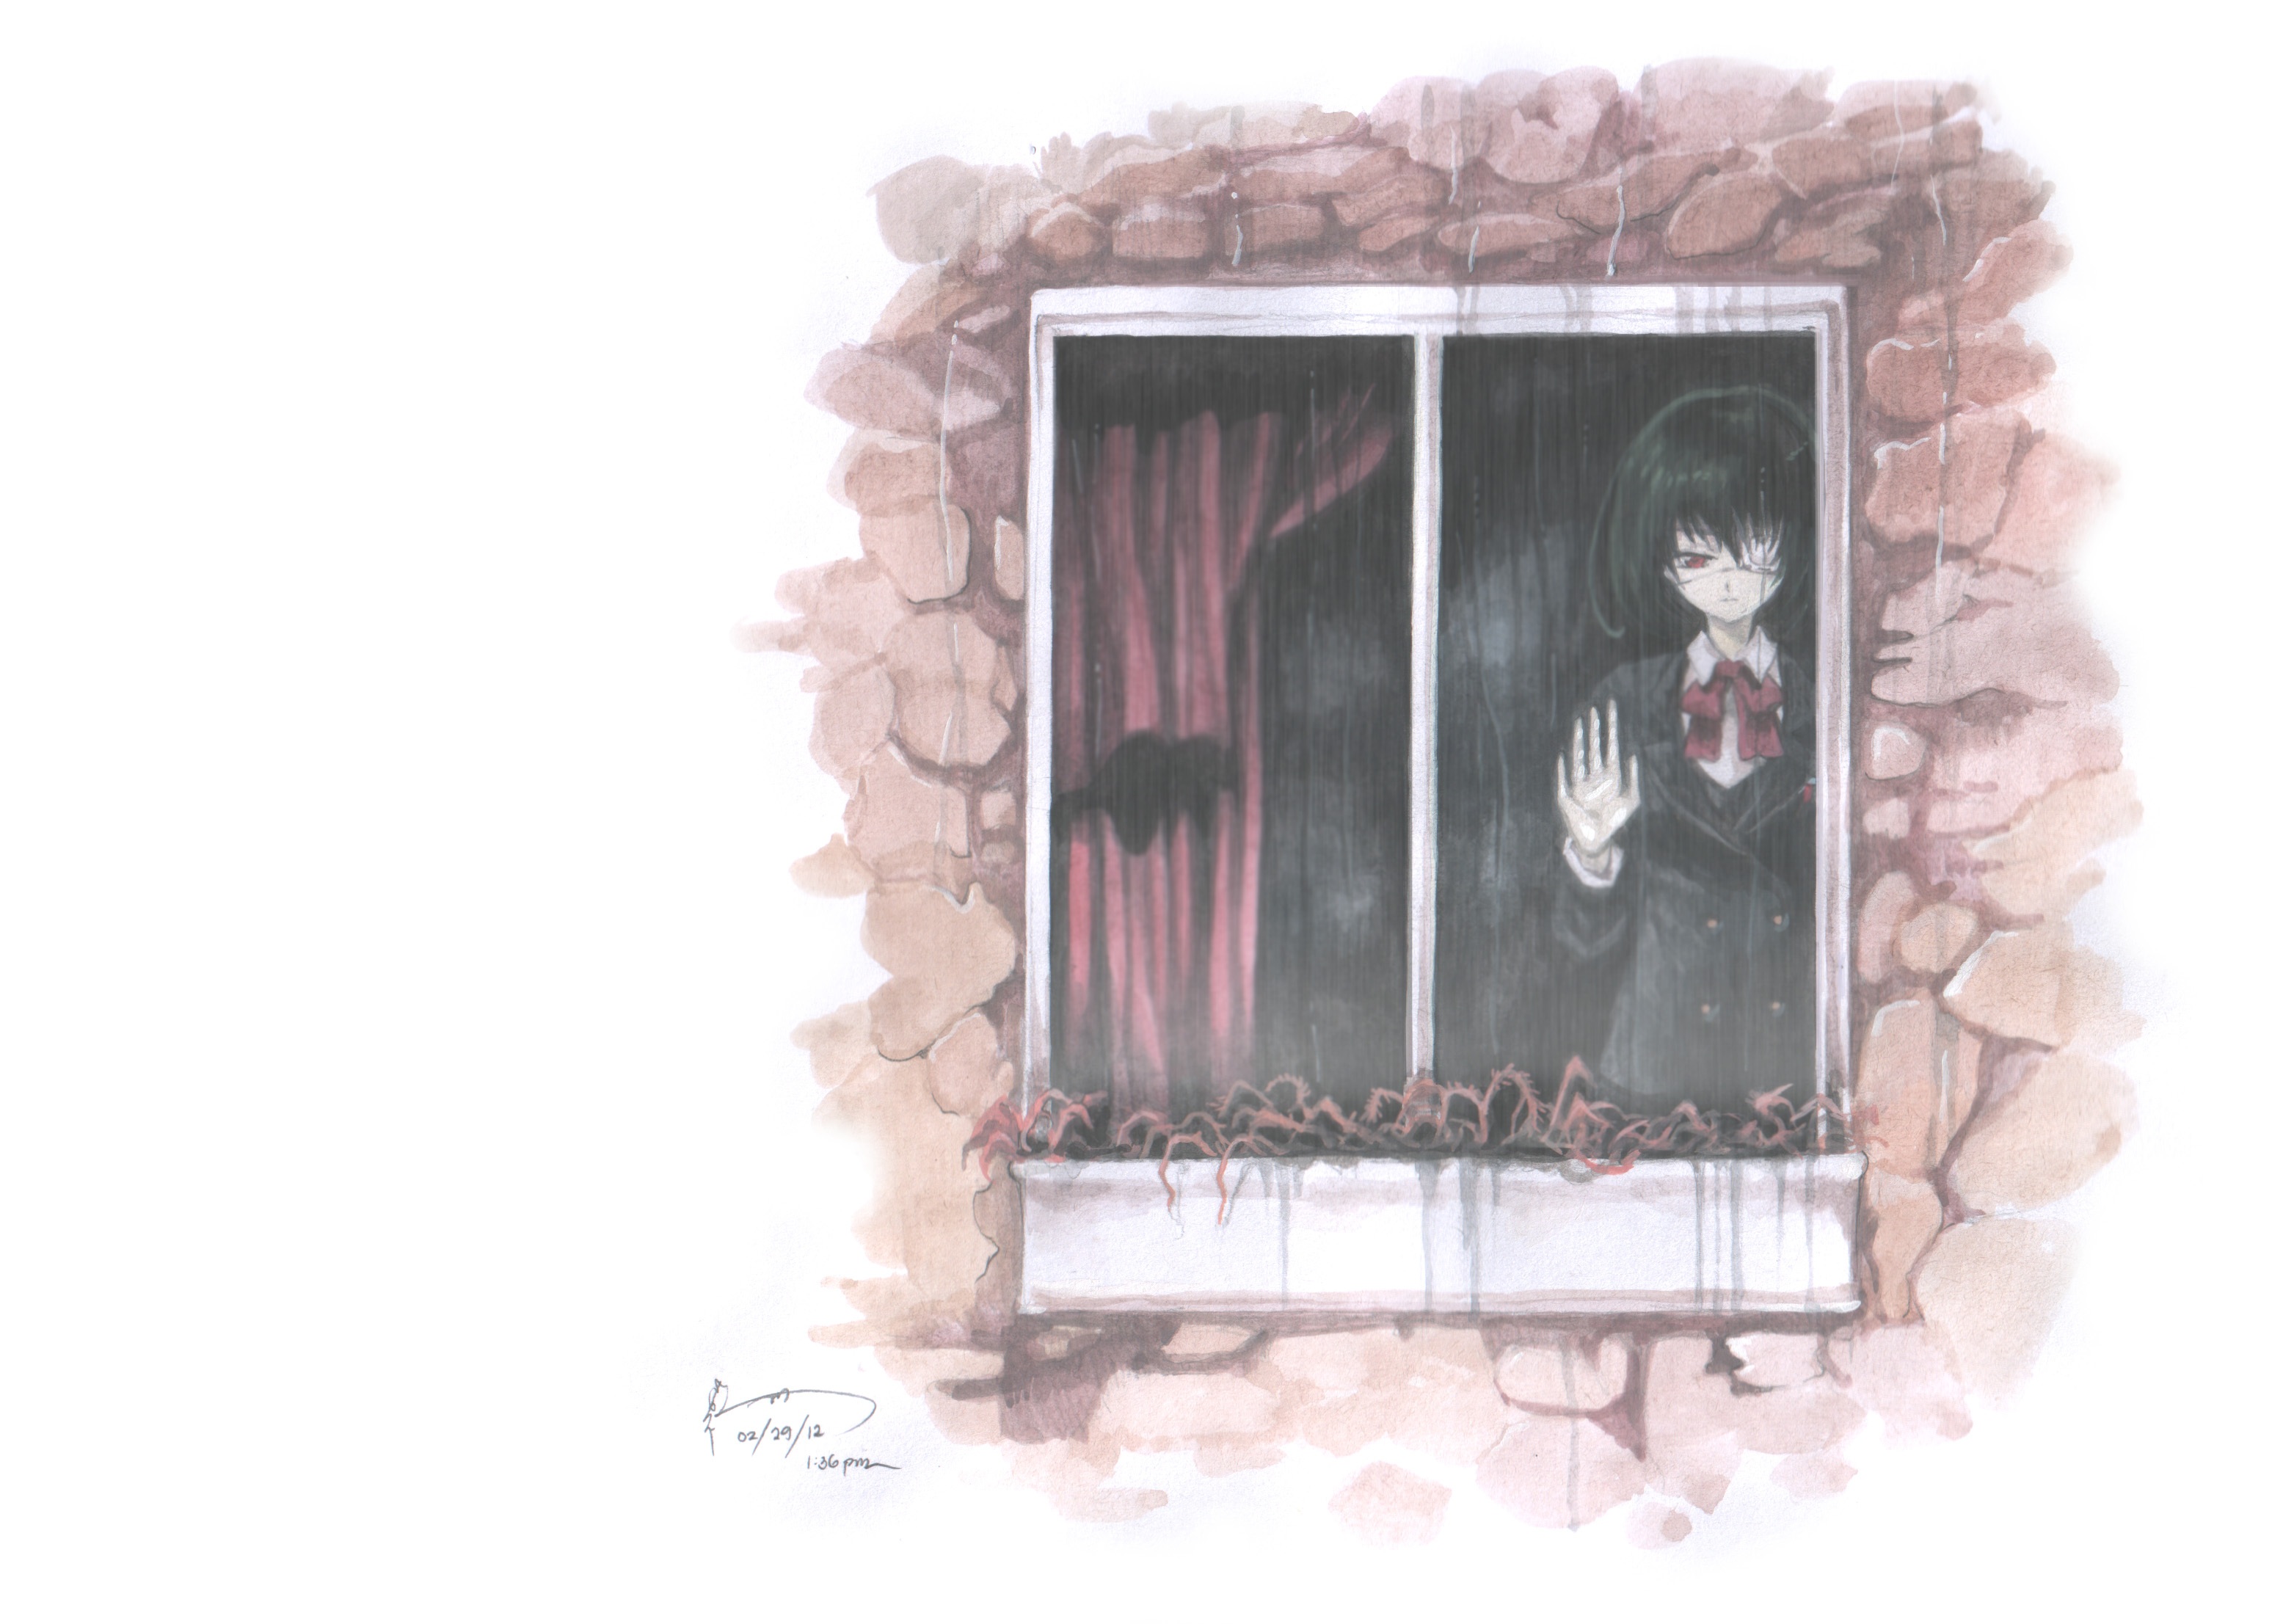 Anime 3111x2213 Another Misaki Mei anime anime girls hands on glass window black hair red eyes eyepatches